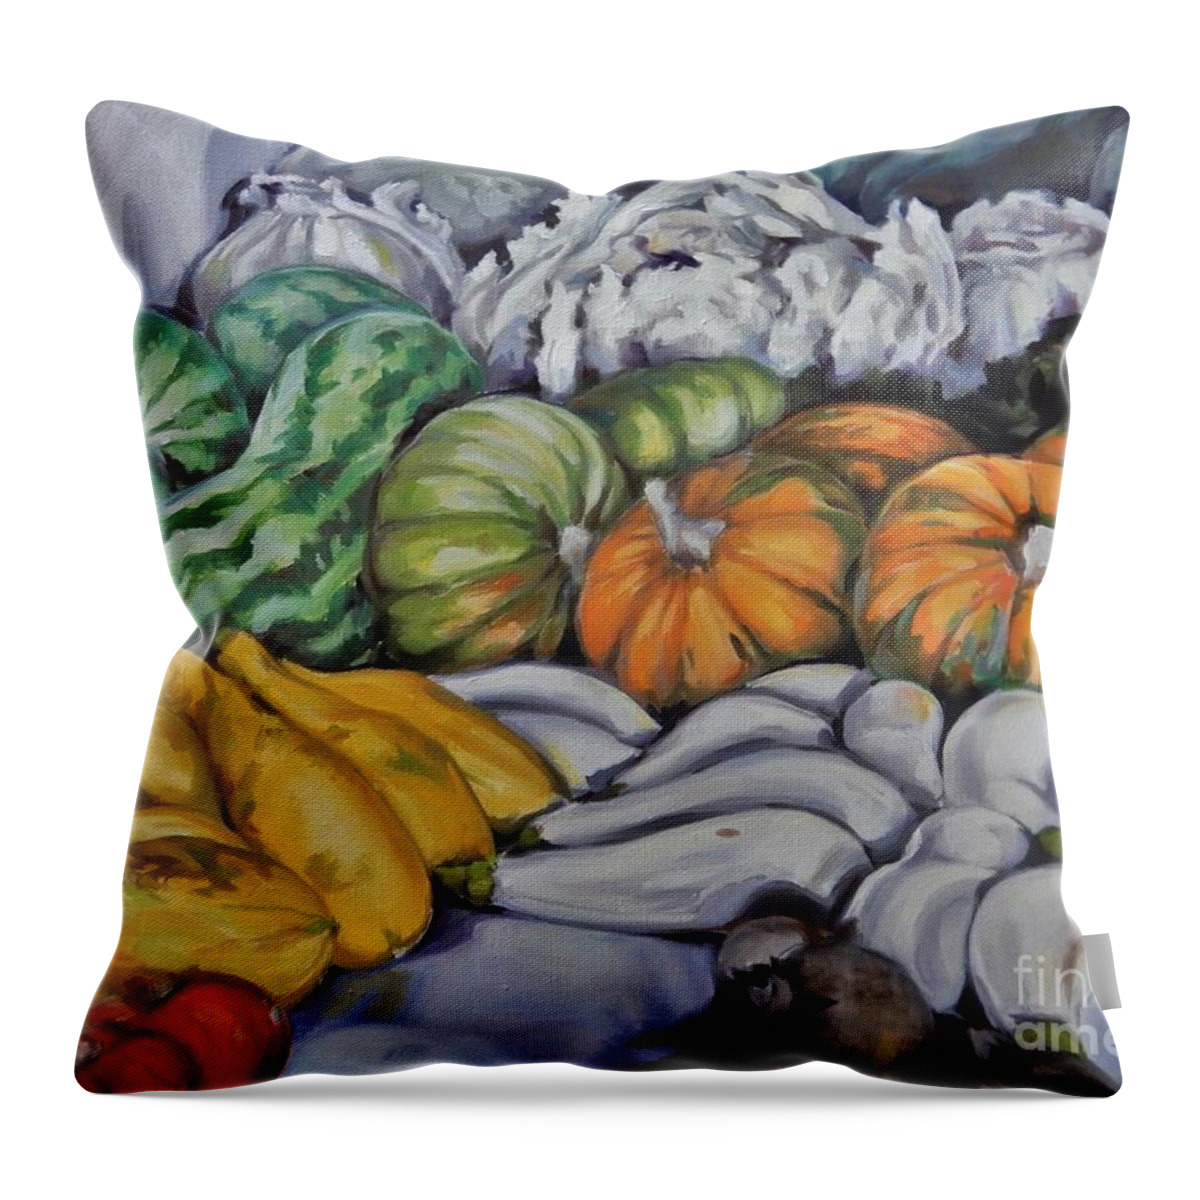 Vegetables Throw Pillow featuring the painting Autumn Harvest by K M Pawelec